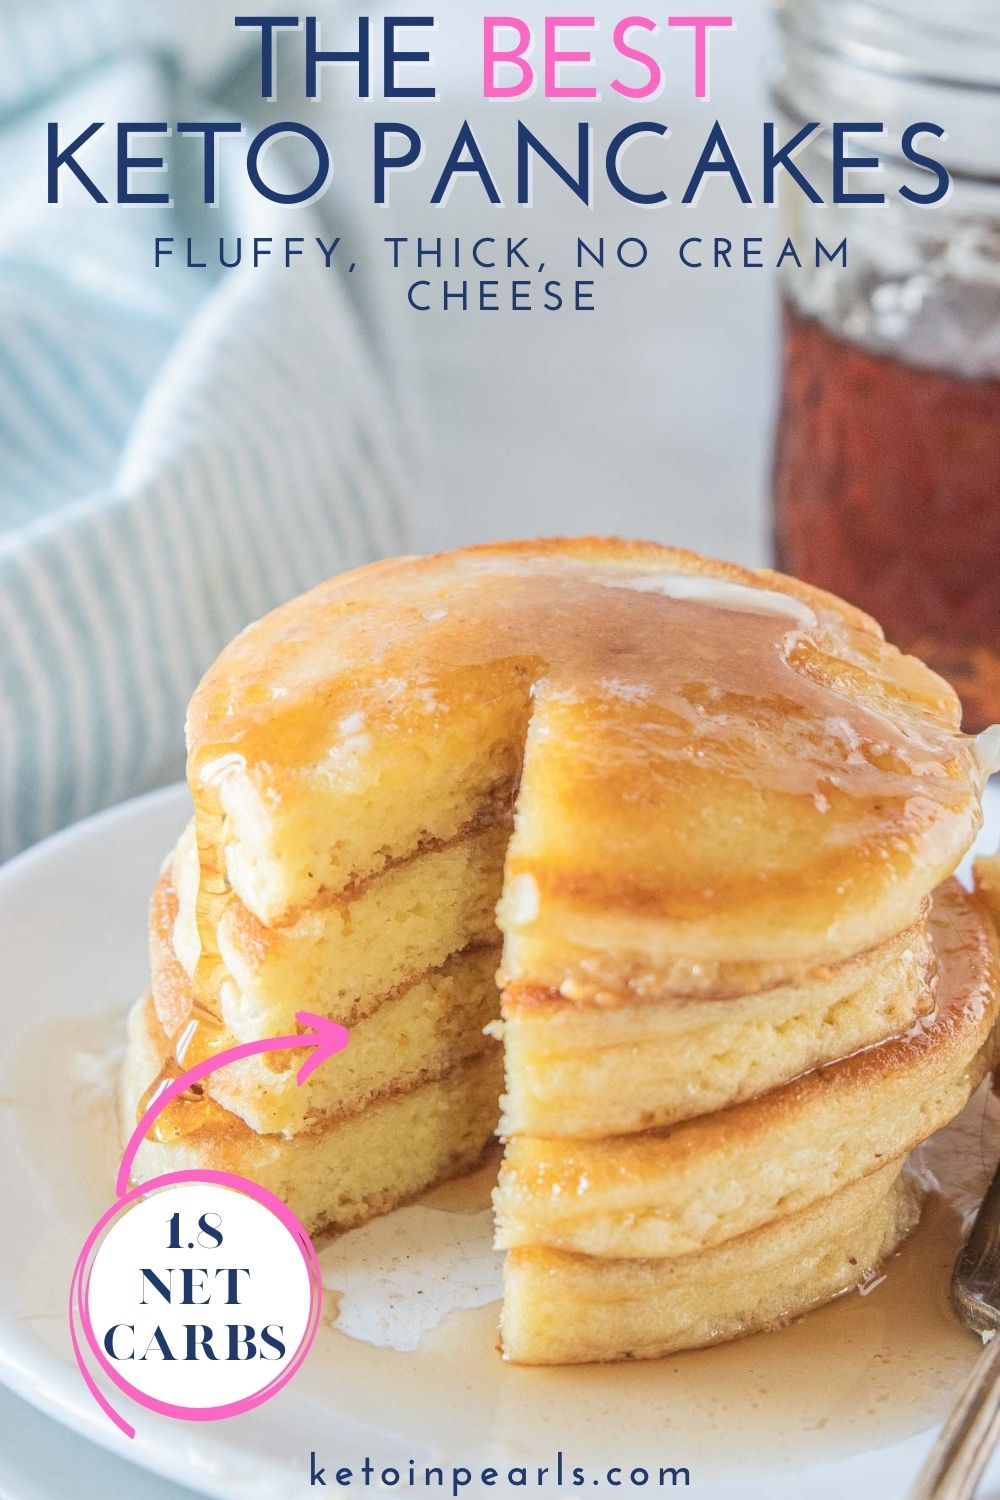 Look no further, these are truly the best keto pancakes! These fluffy keto pancakes are thick and buttery and made with no cream cheese. No other recipes can stack up to these best keto pancakes!